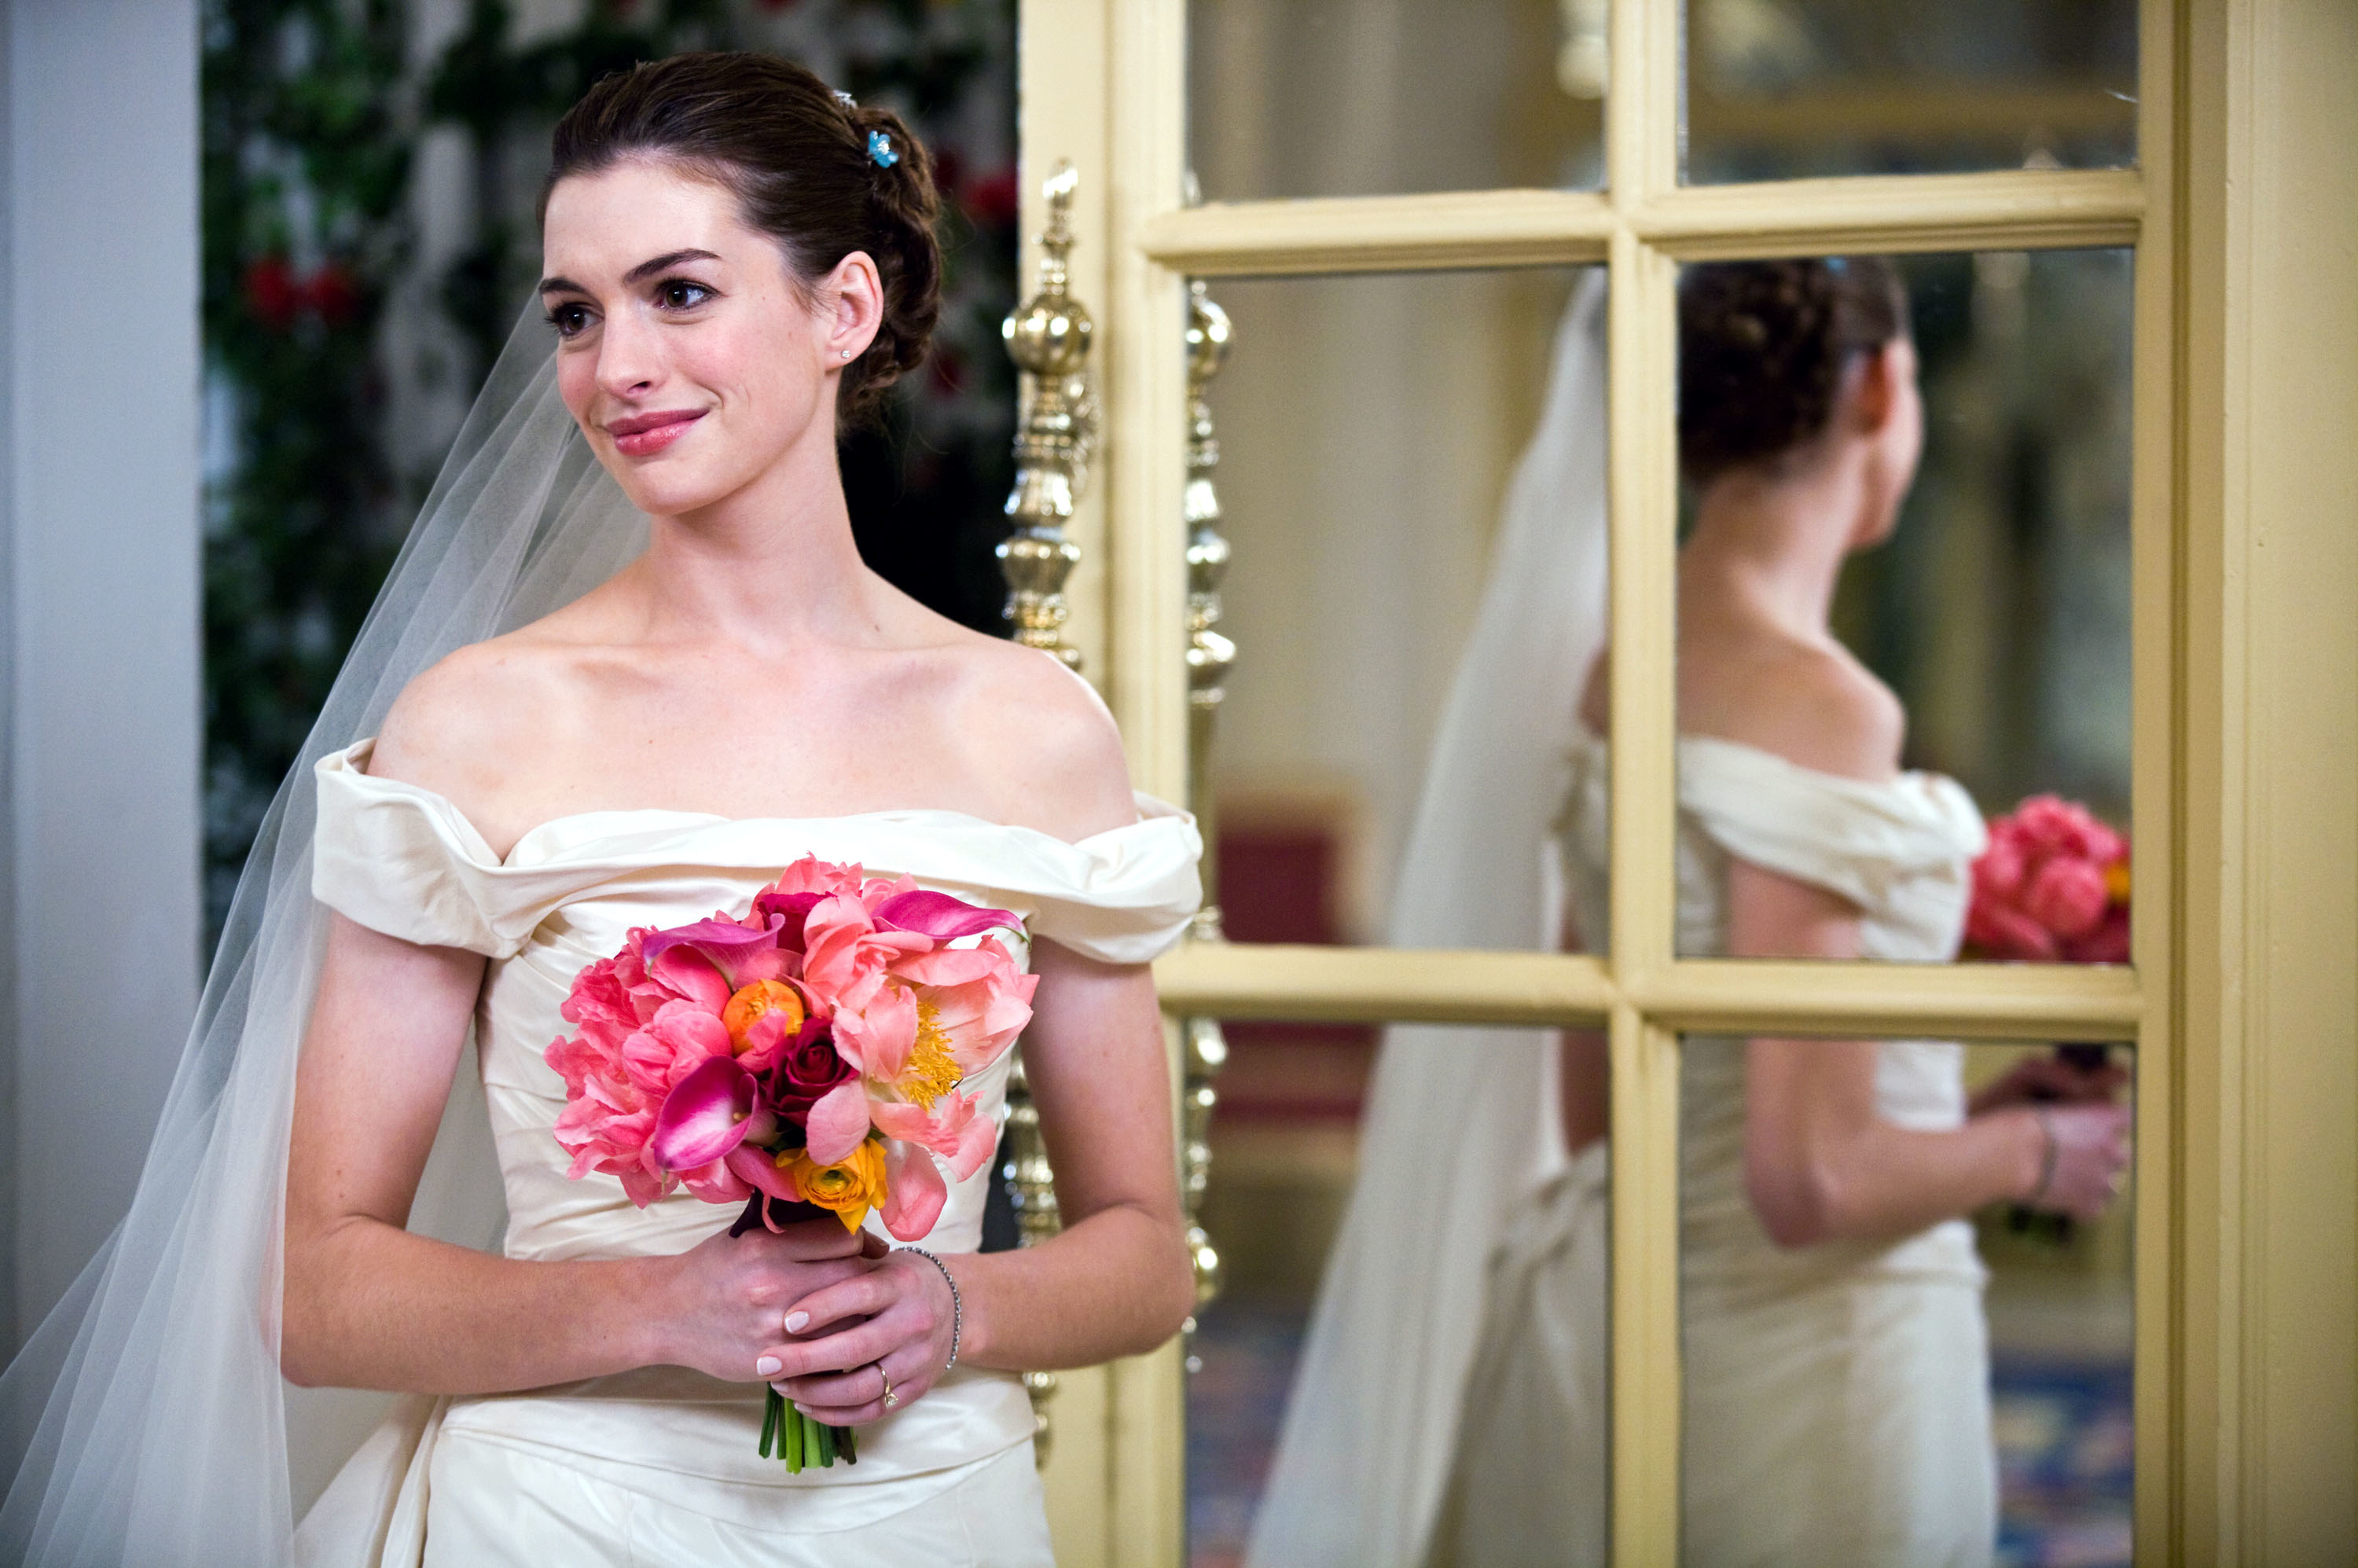 Anne Hathaway wearing a shoulderless bridal gown and veil holding a bouquet of flowers